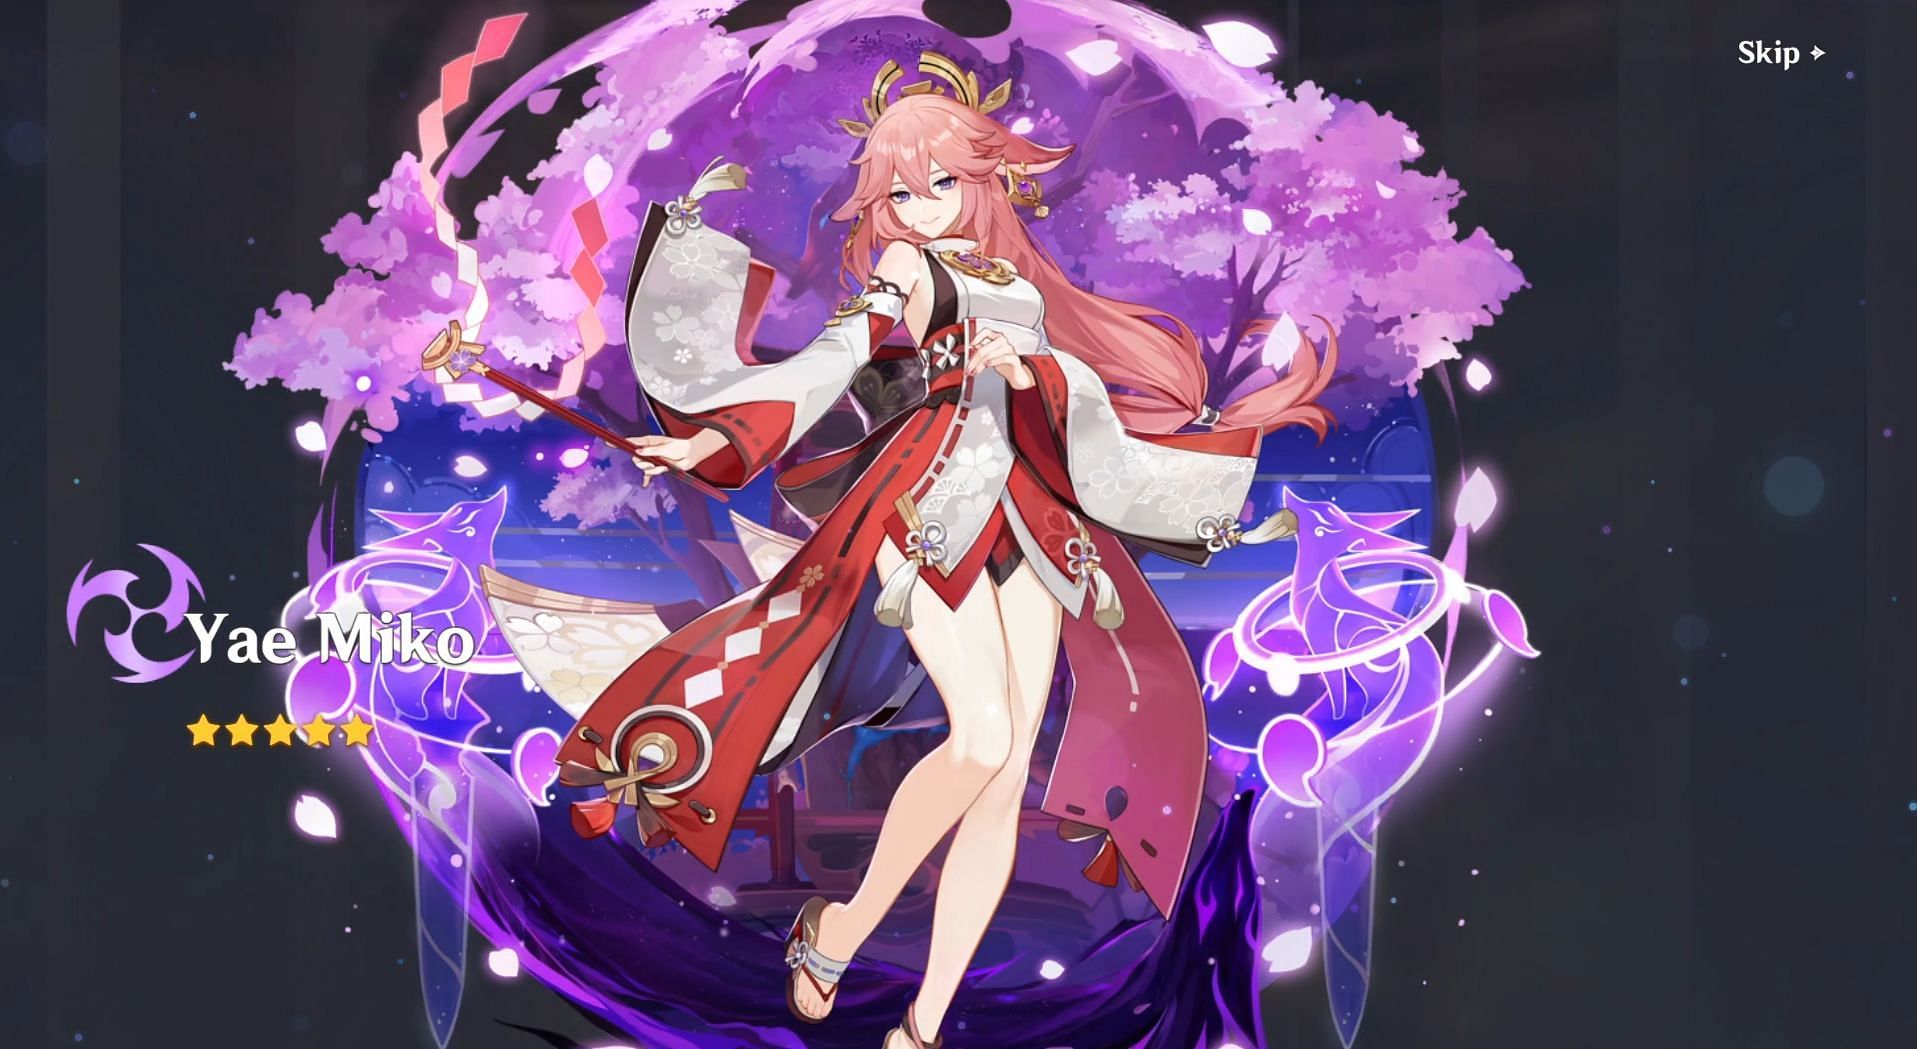 Yae Miko banner is now available to all servers (Image via HoYoverse)